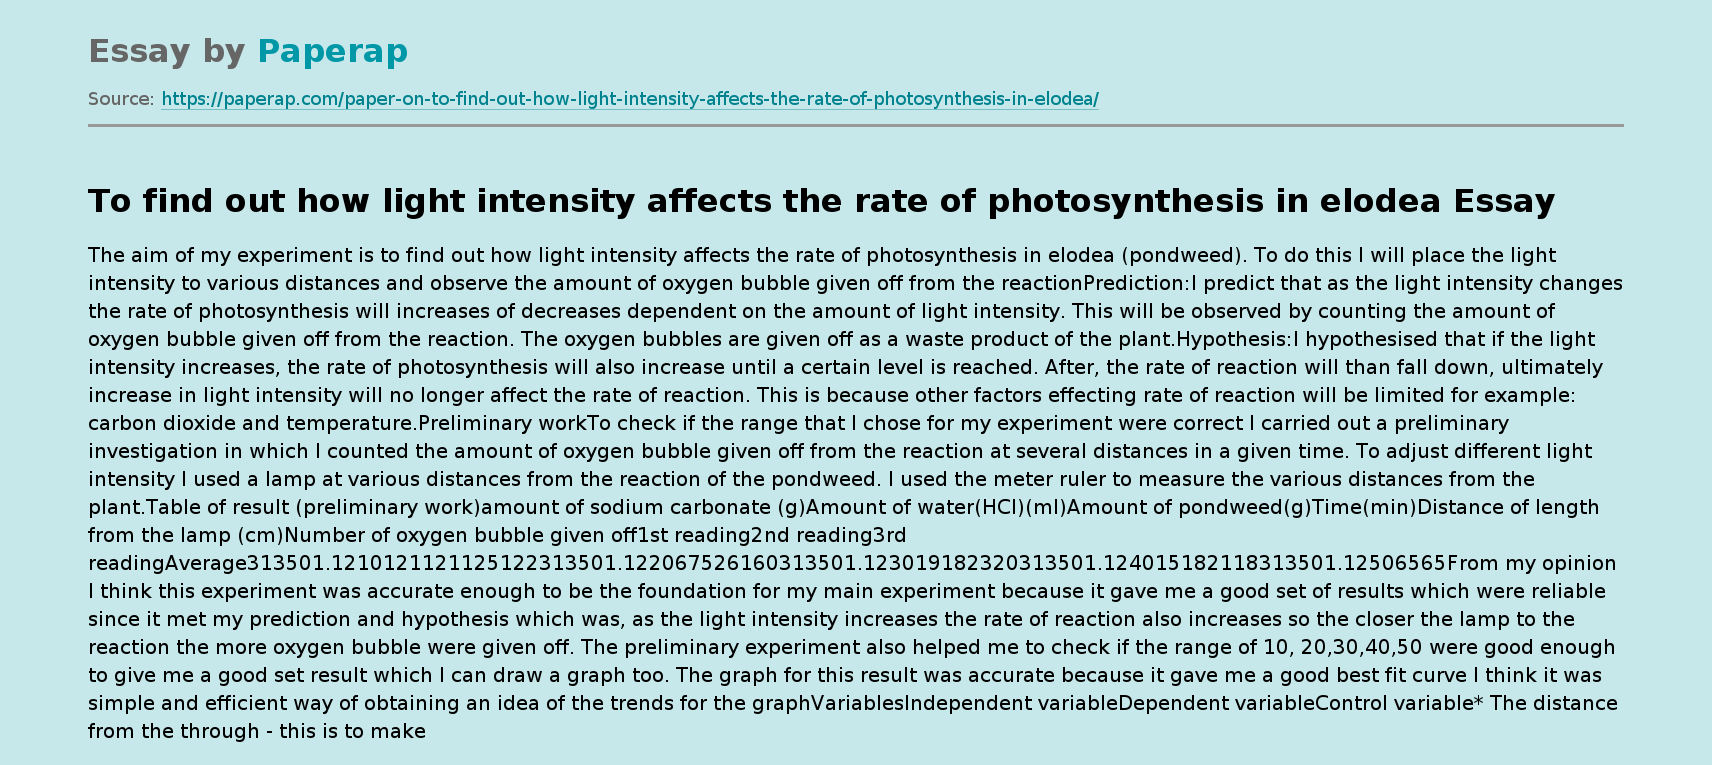 To find out how light intensity affects the rate of photosynthesis in elodea